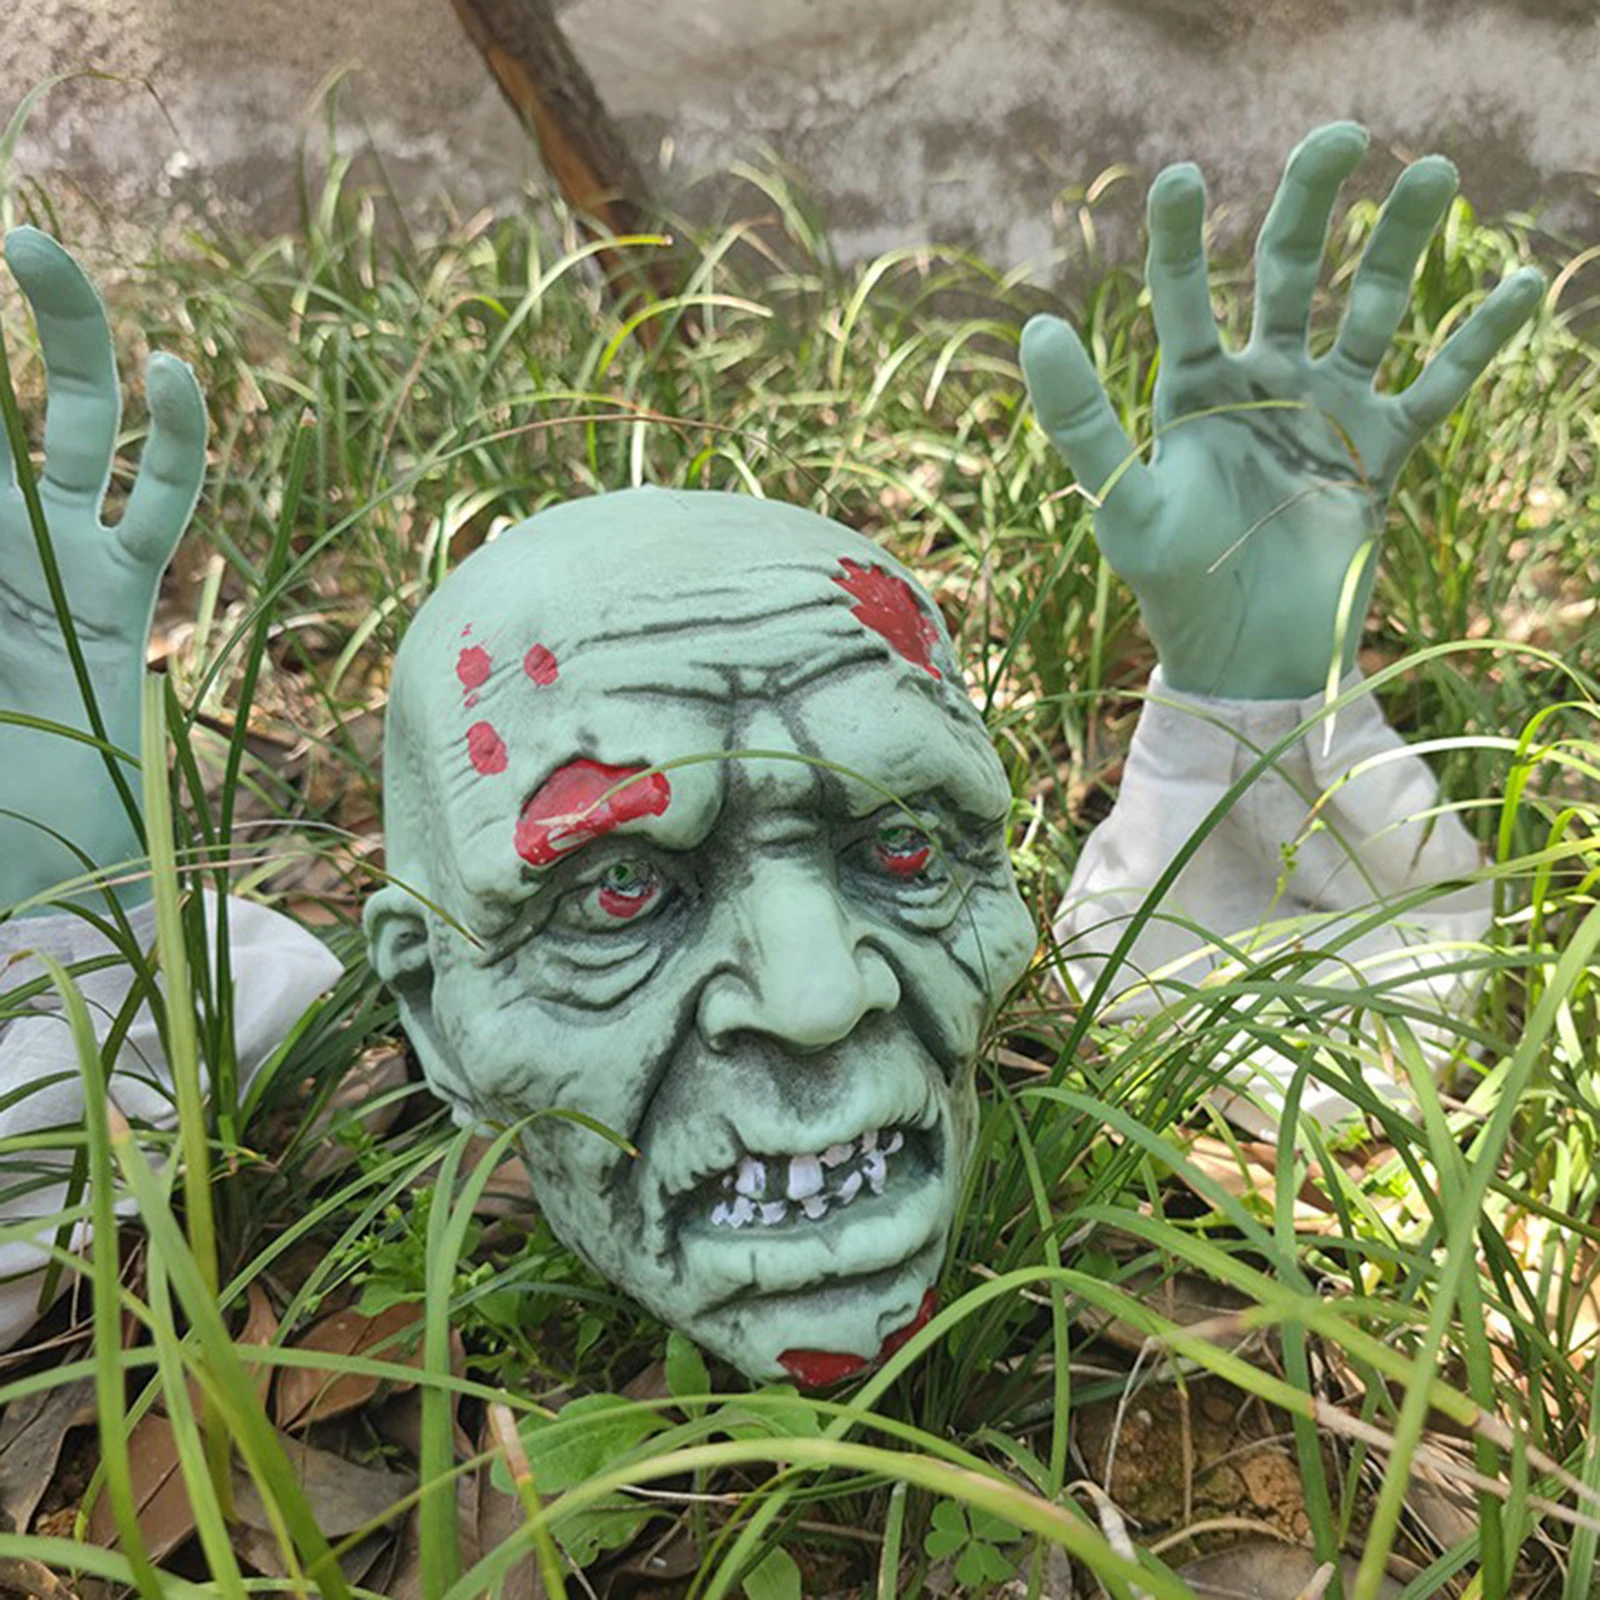 Scary Garden Zombie Decoration Outdoor Head Arms Ornament Statue Decor Stake